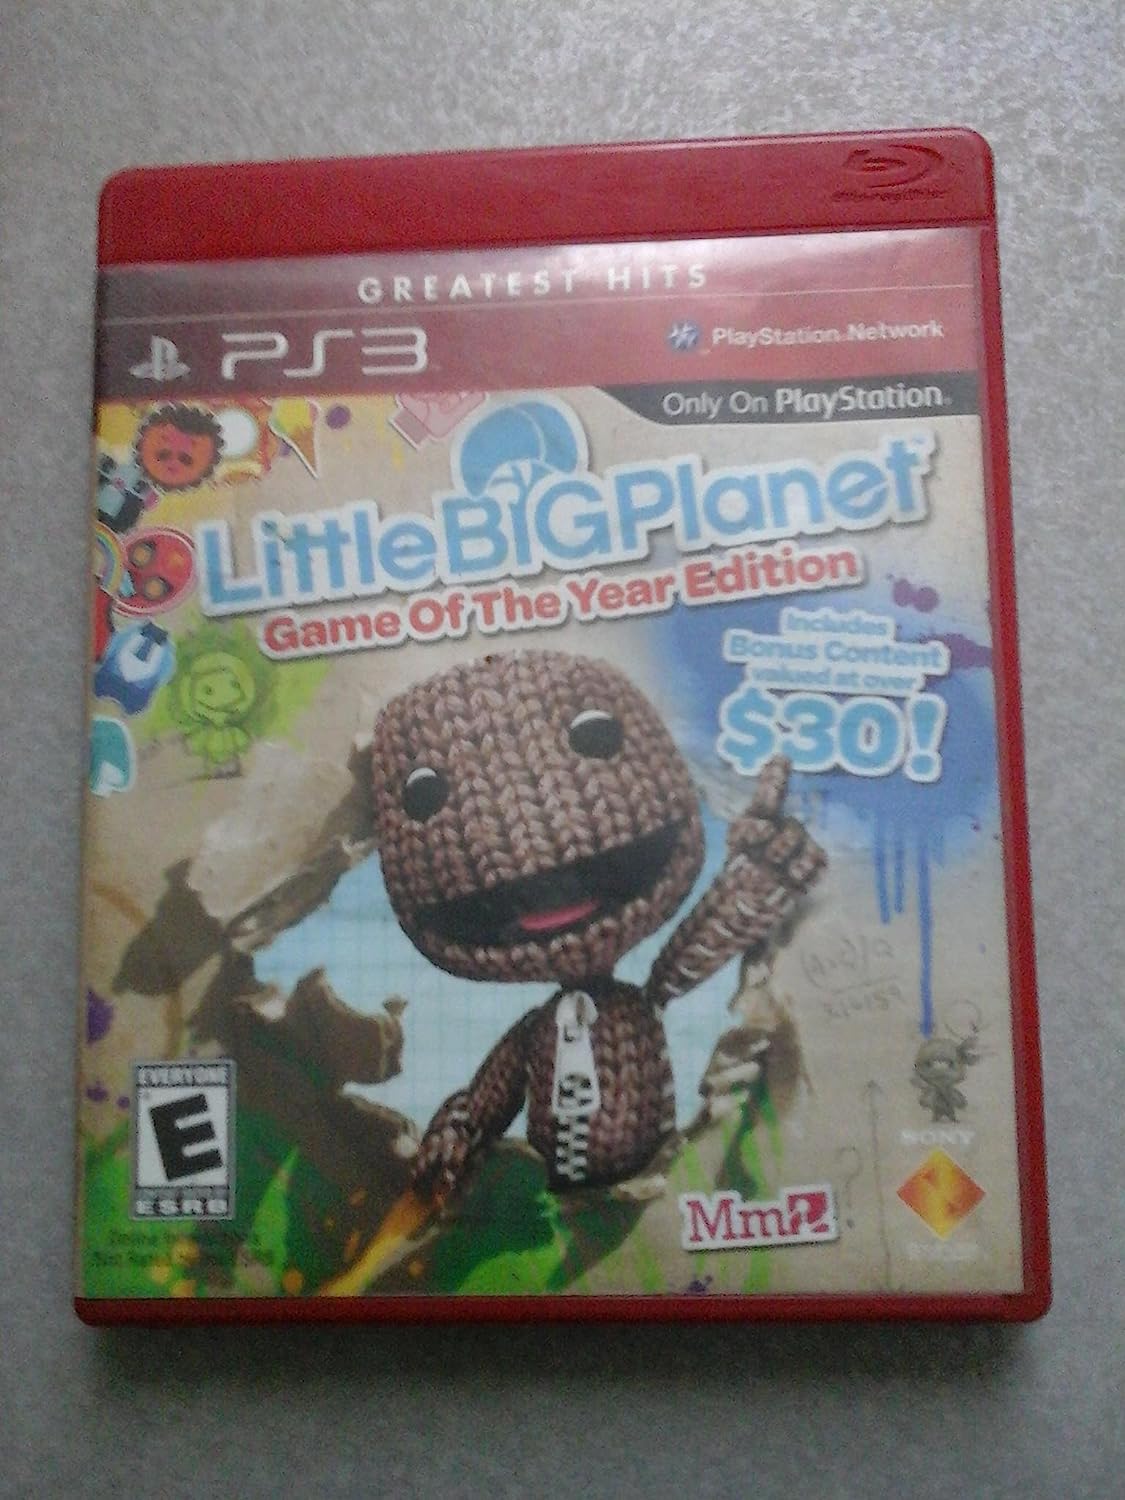 LittleBigPlanet [Game of the Year]